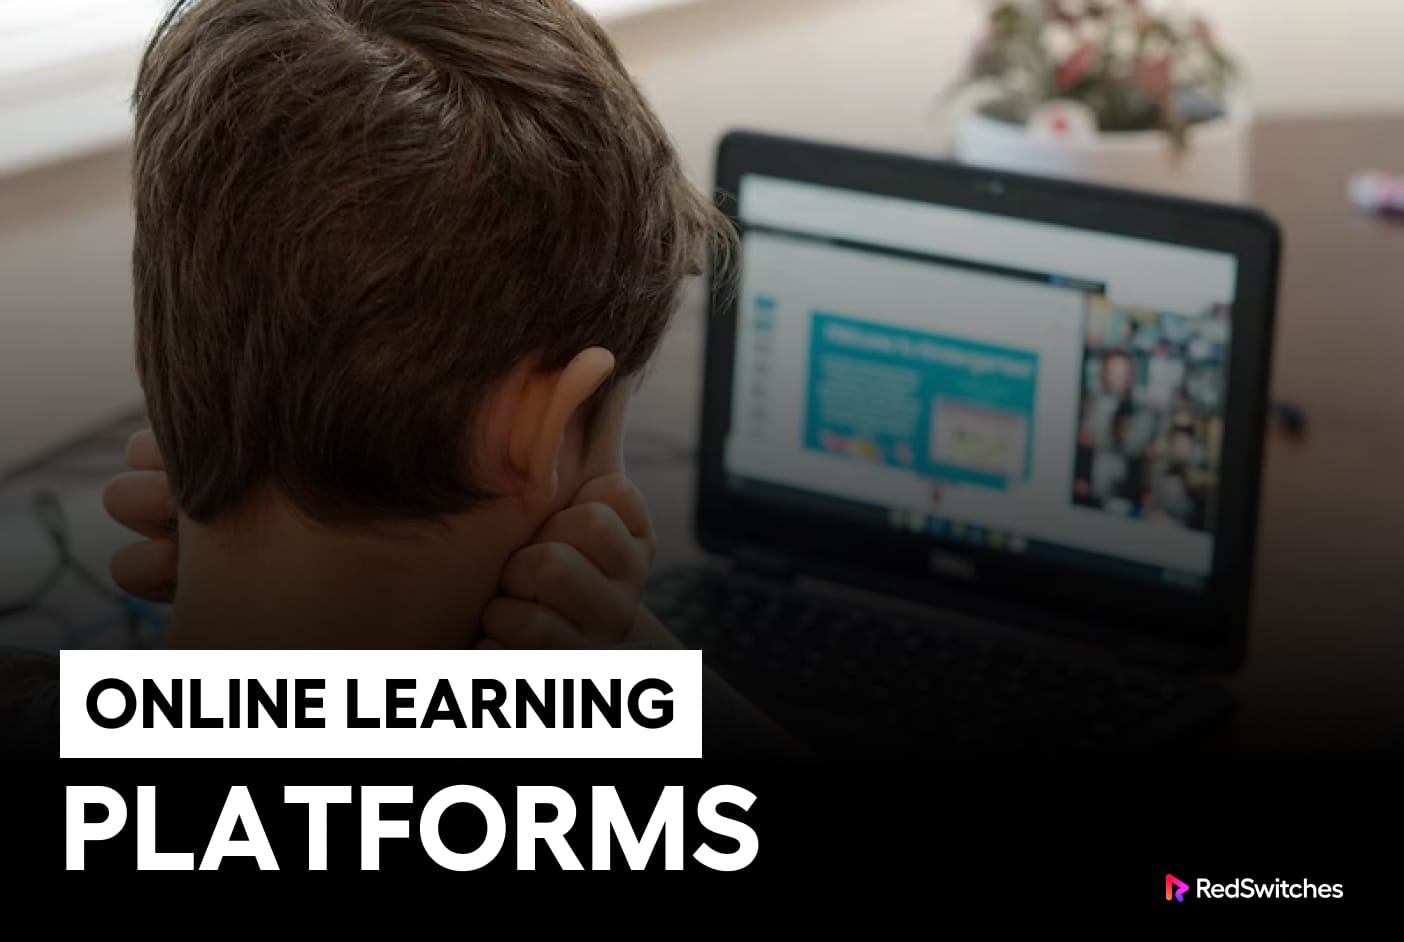 online learning platforms is a examples of databases